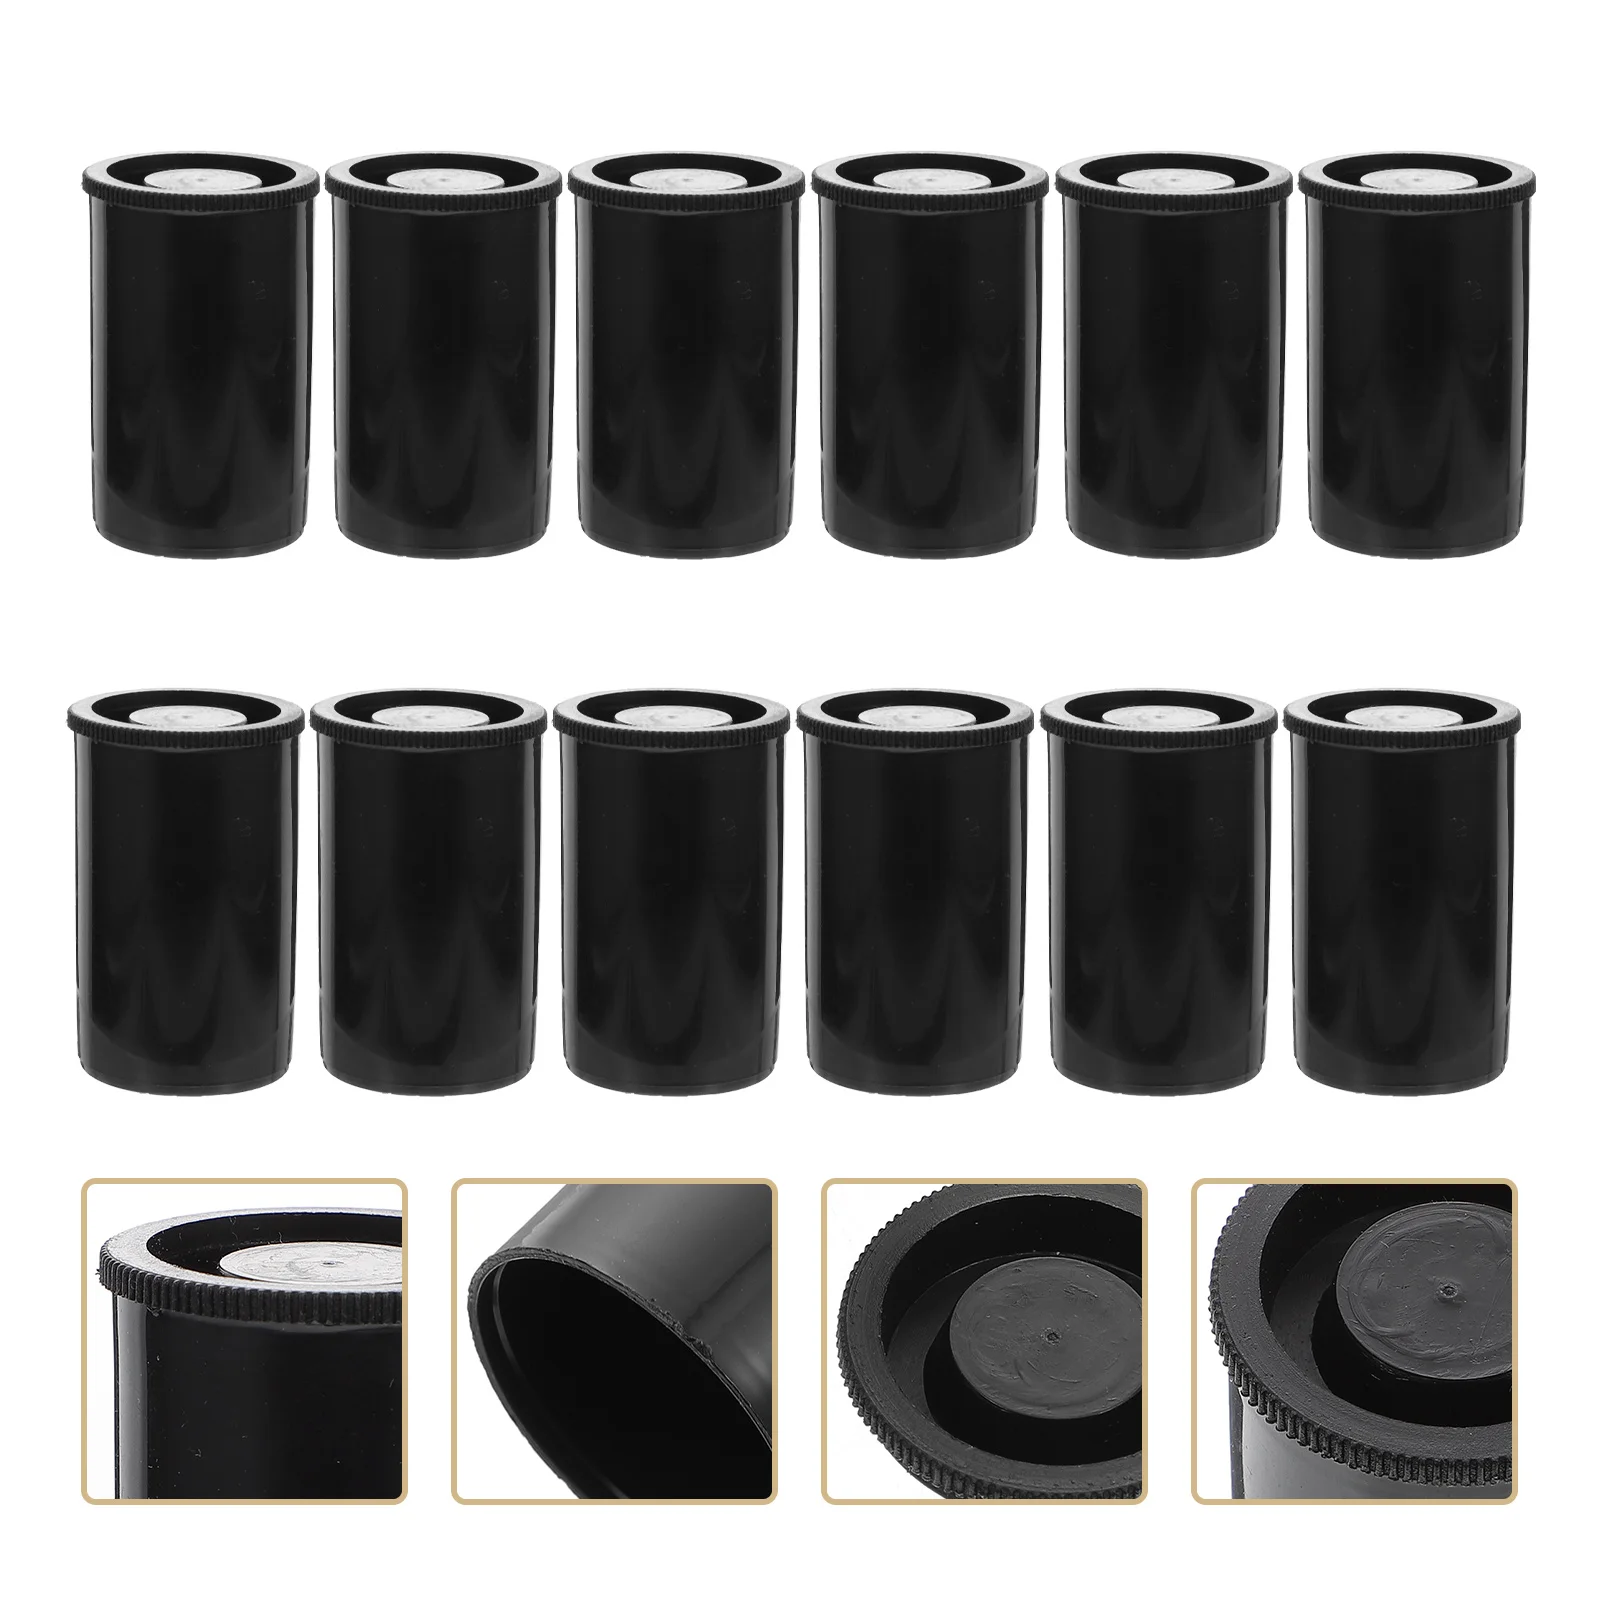 36pcs Empty Film Canisters Plastic Camera Reel Canisters Film Roll Holder